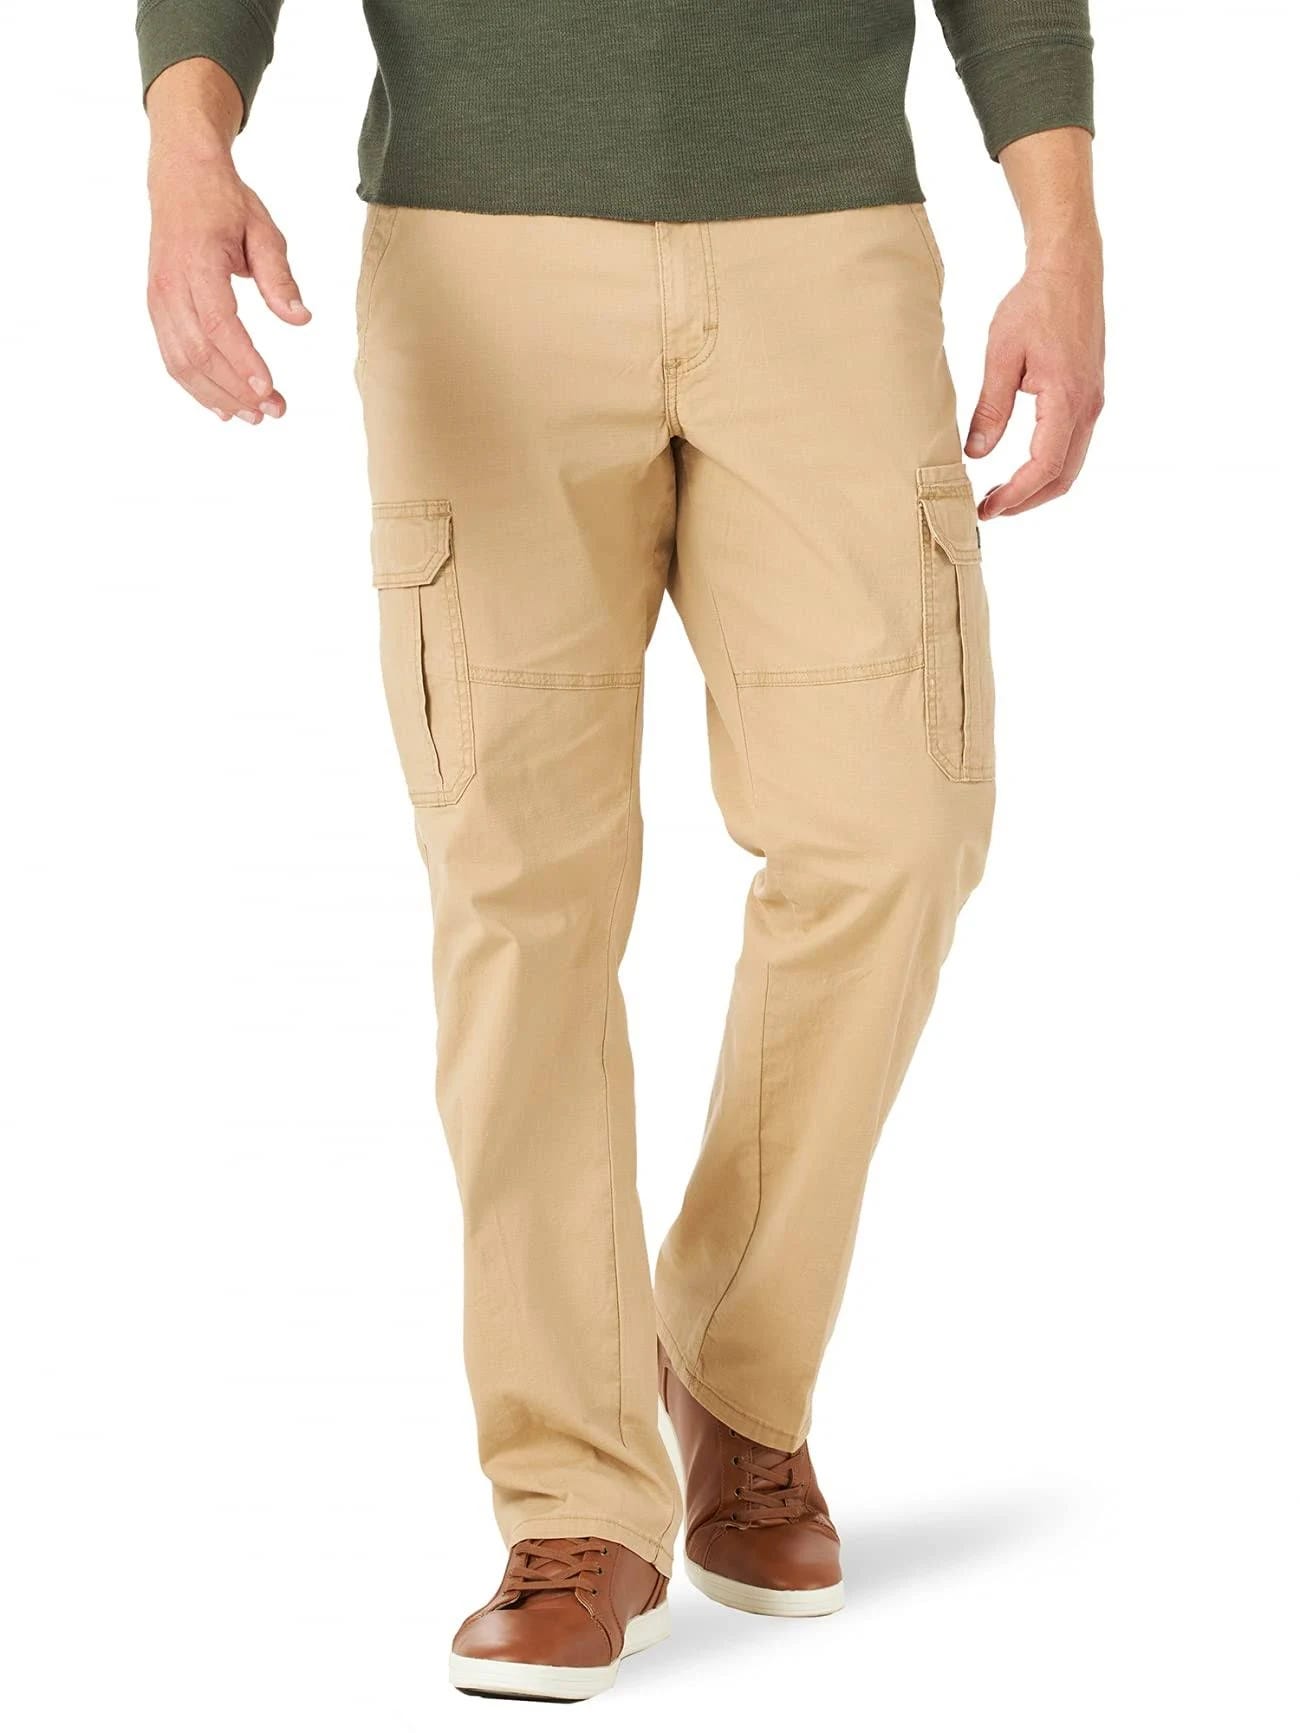 Comfortable Stretch Cargo Pants with Heavy-Duty Hardware | Image